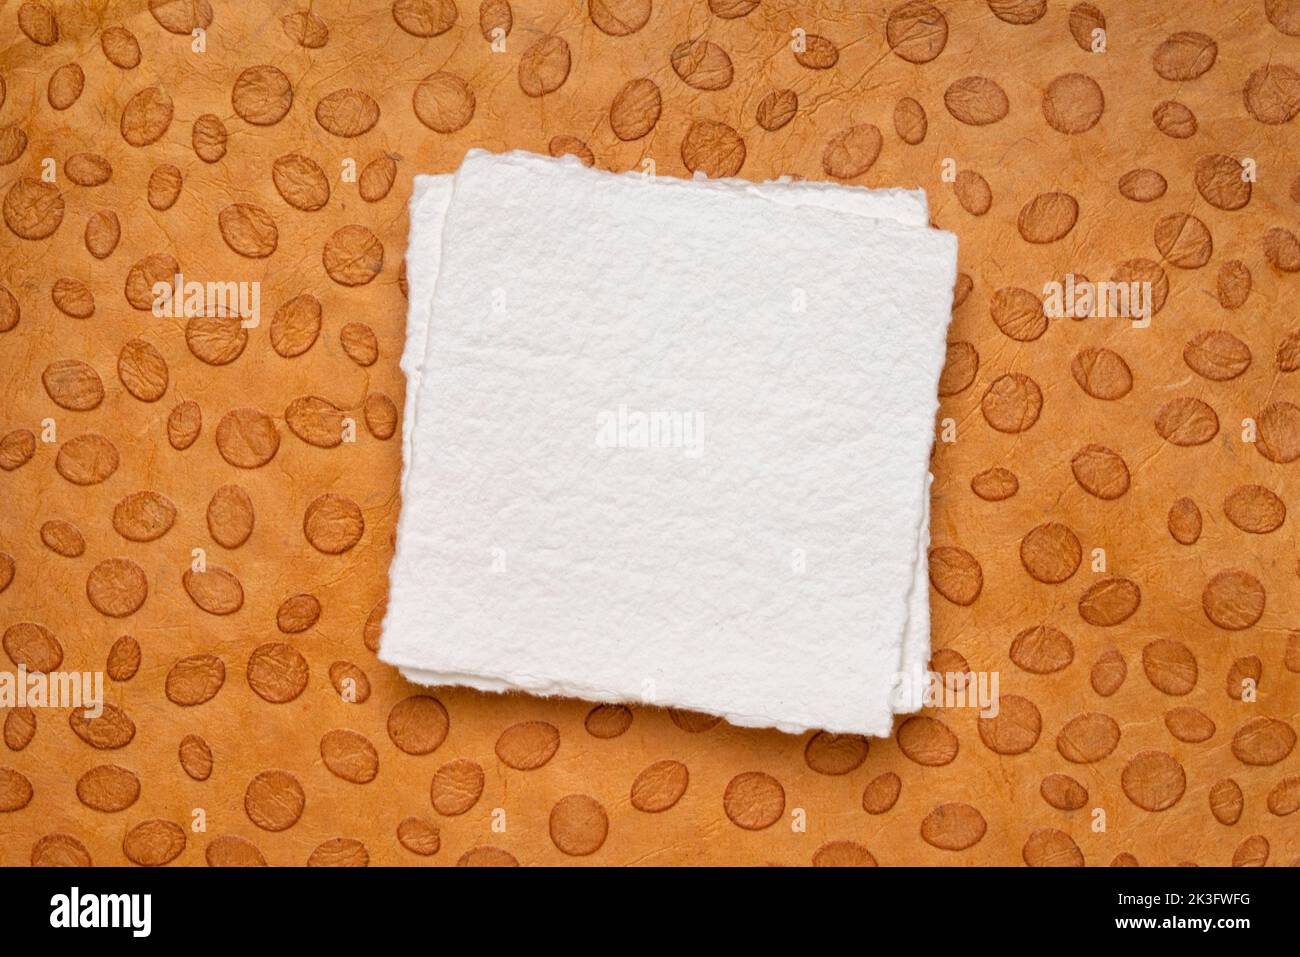 small square sheet of blank white Khadi paper against orange paper with dot pattern Stock Photo